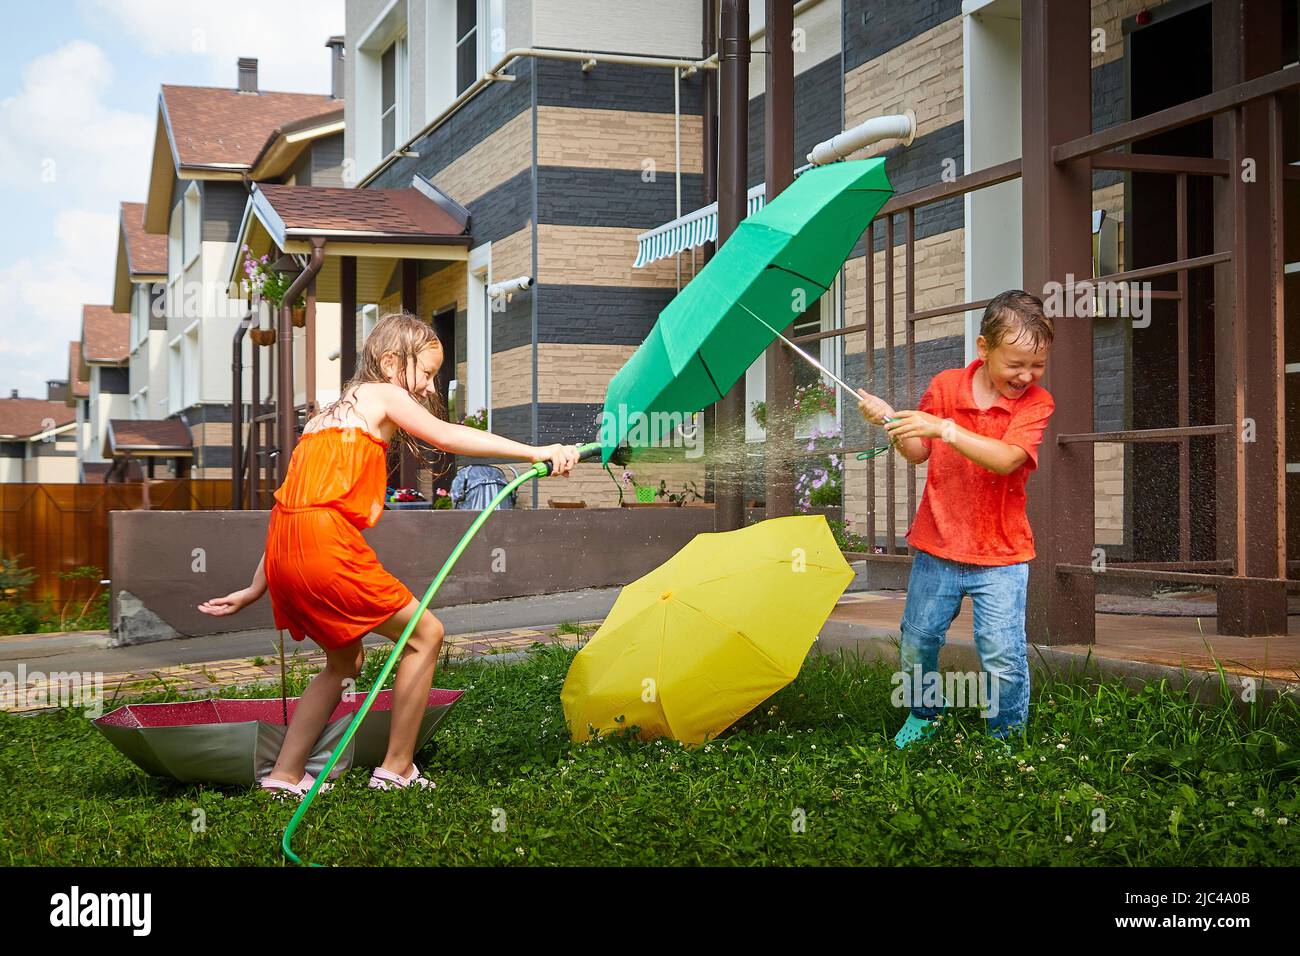 Children playing with garden sprinkler. Brother and sister running and jumping. Summer outdoor water fun in backyard. Boy and girl play with hose Stock Photo